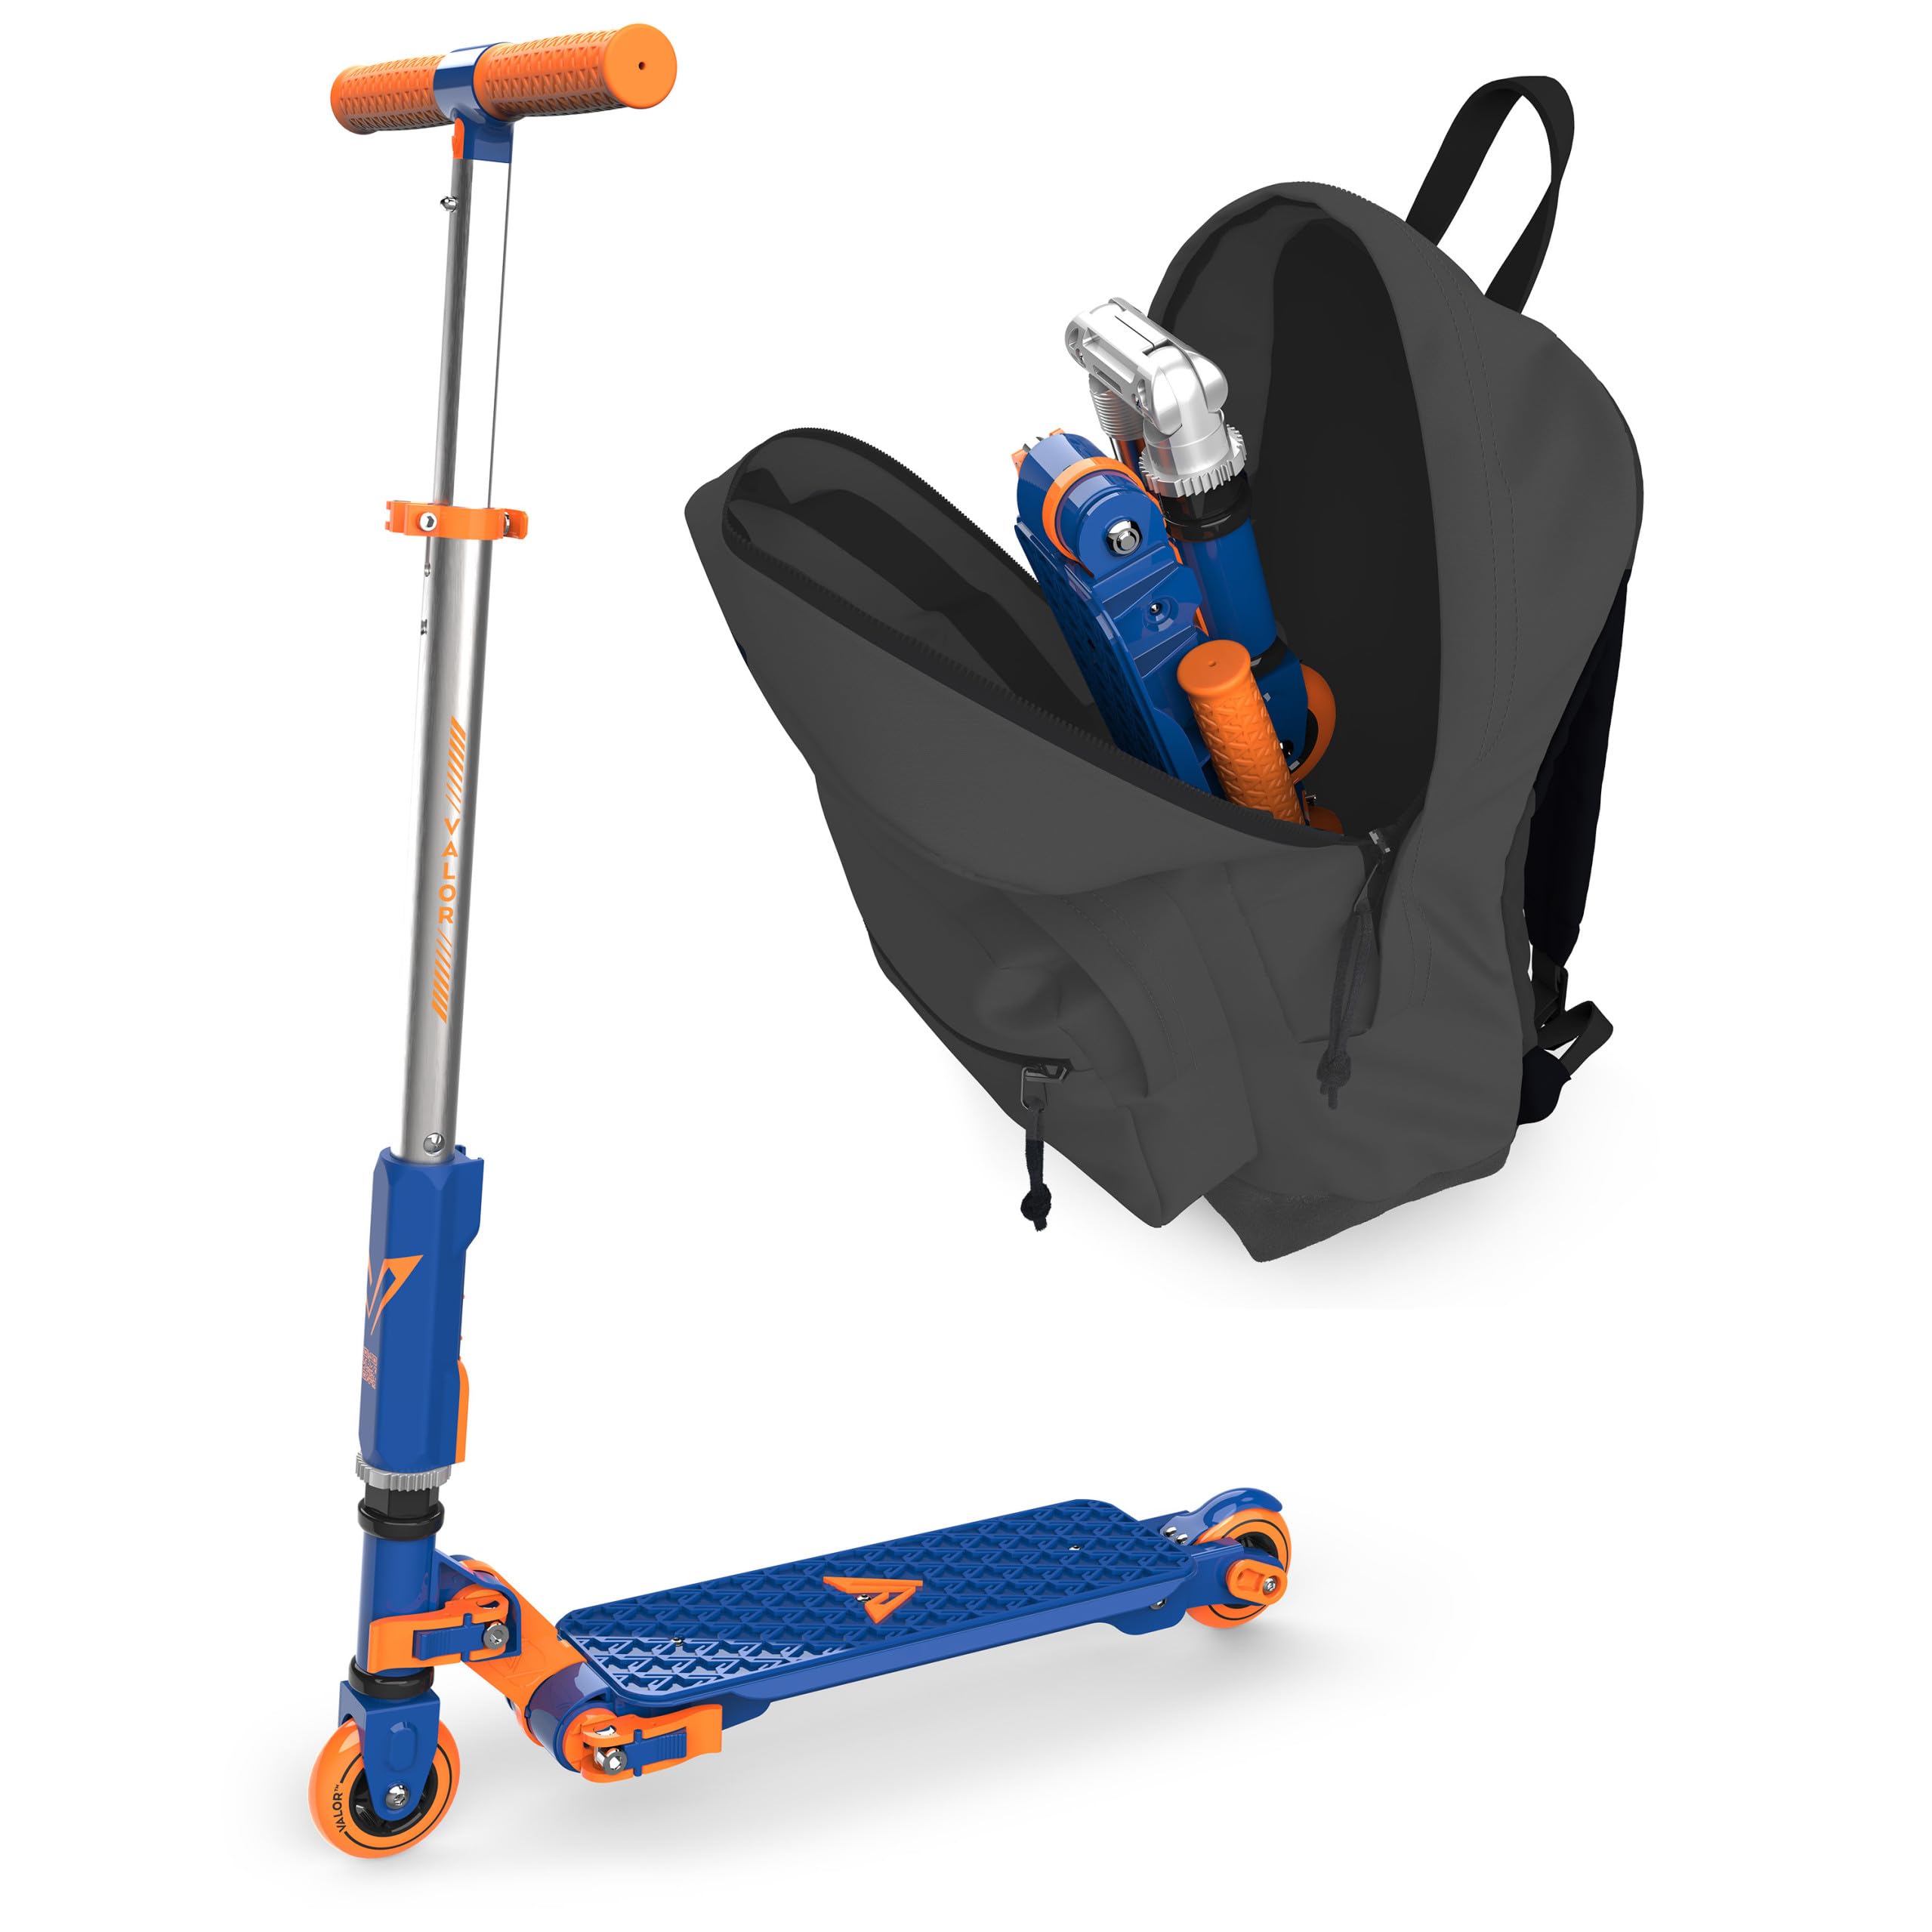 Valor Kick Scooter Toy, Ultra Compact & Lightweight Foldable Scooter Kids with ABEC7 Wheel Bearing, Outdoor Toys for Kids Ages 8-12 and Up, Blue & Orange $10.13